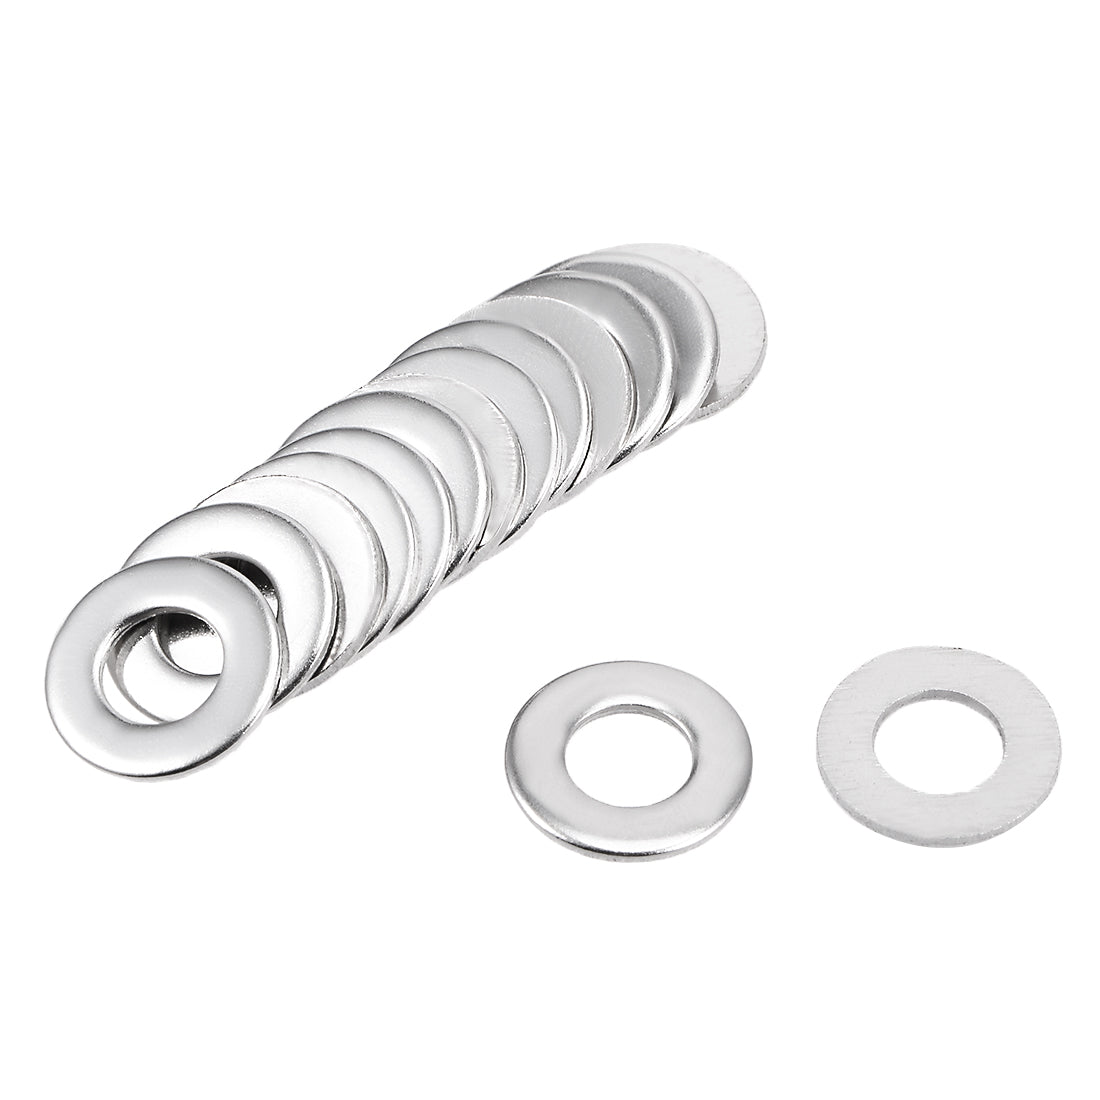 uxcell Uxcell 200 Pcs 12mm x 6mm x 1mm 304 Stainless Steel Flat Washer for Screw Bolt